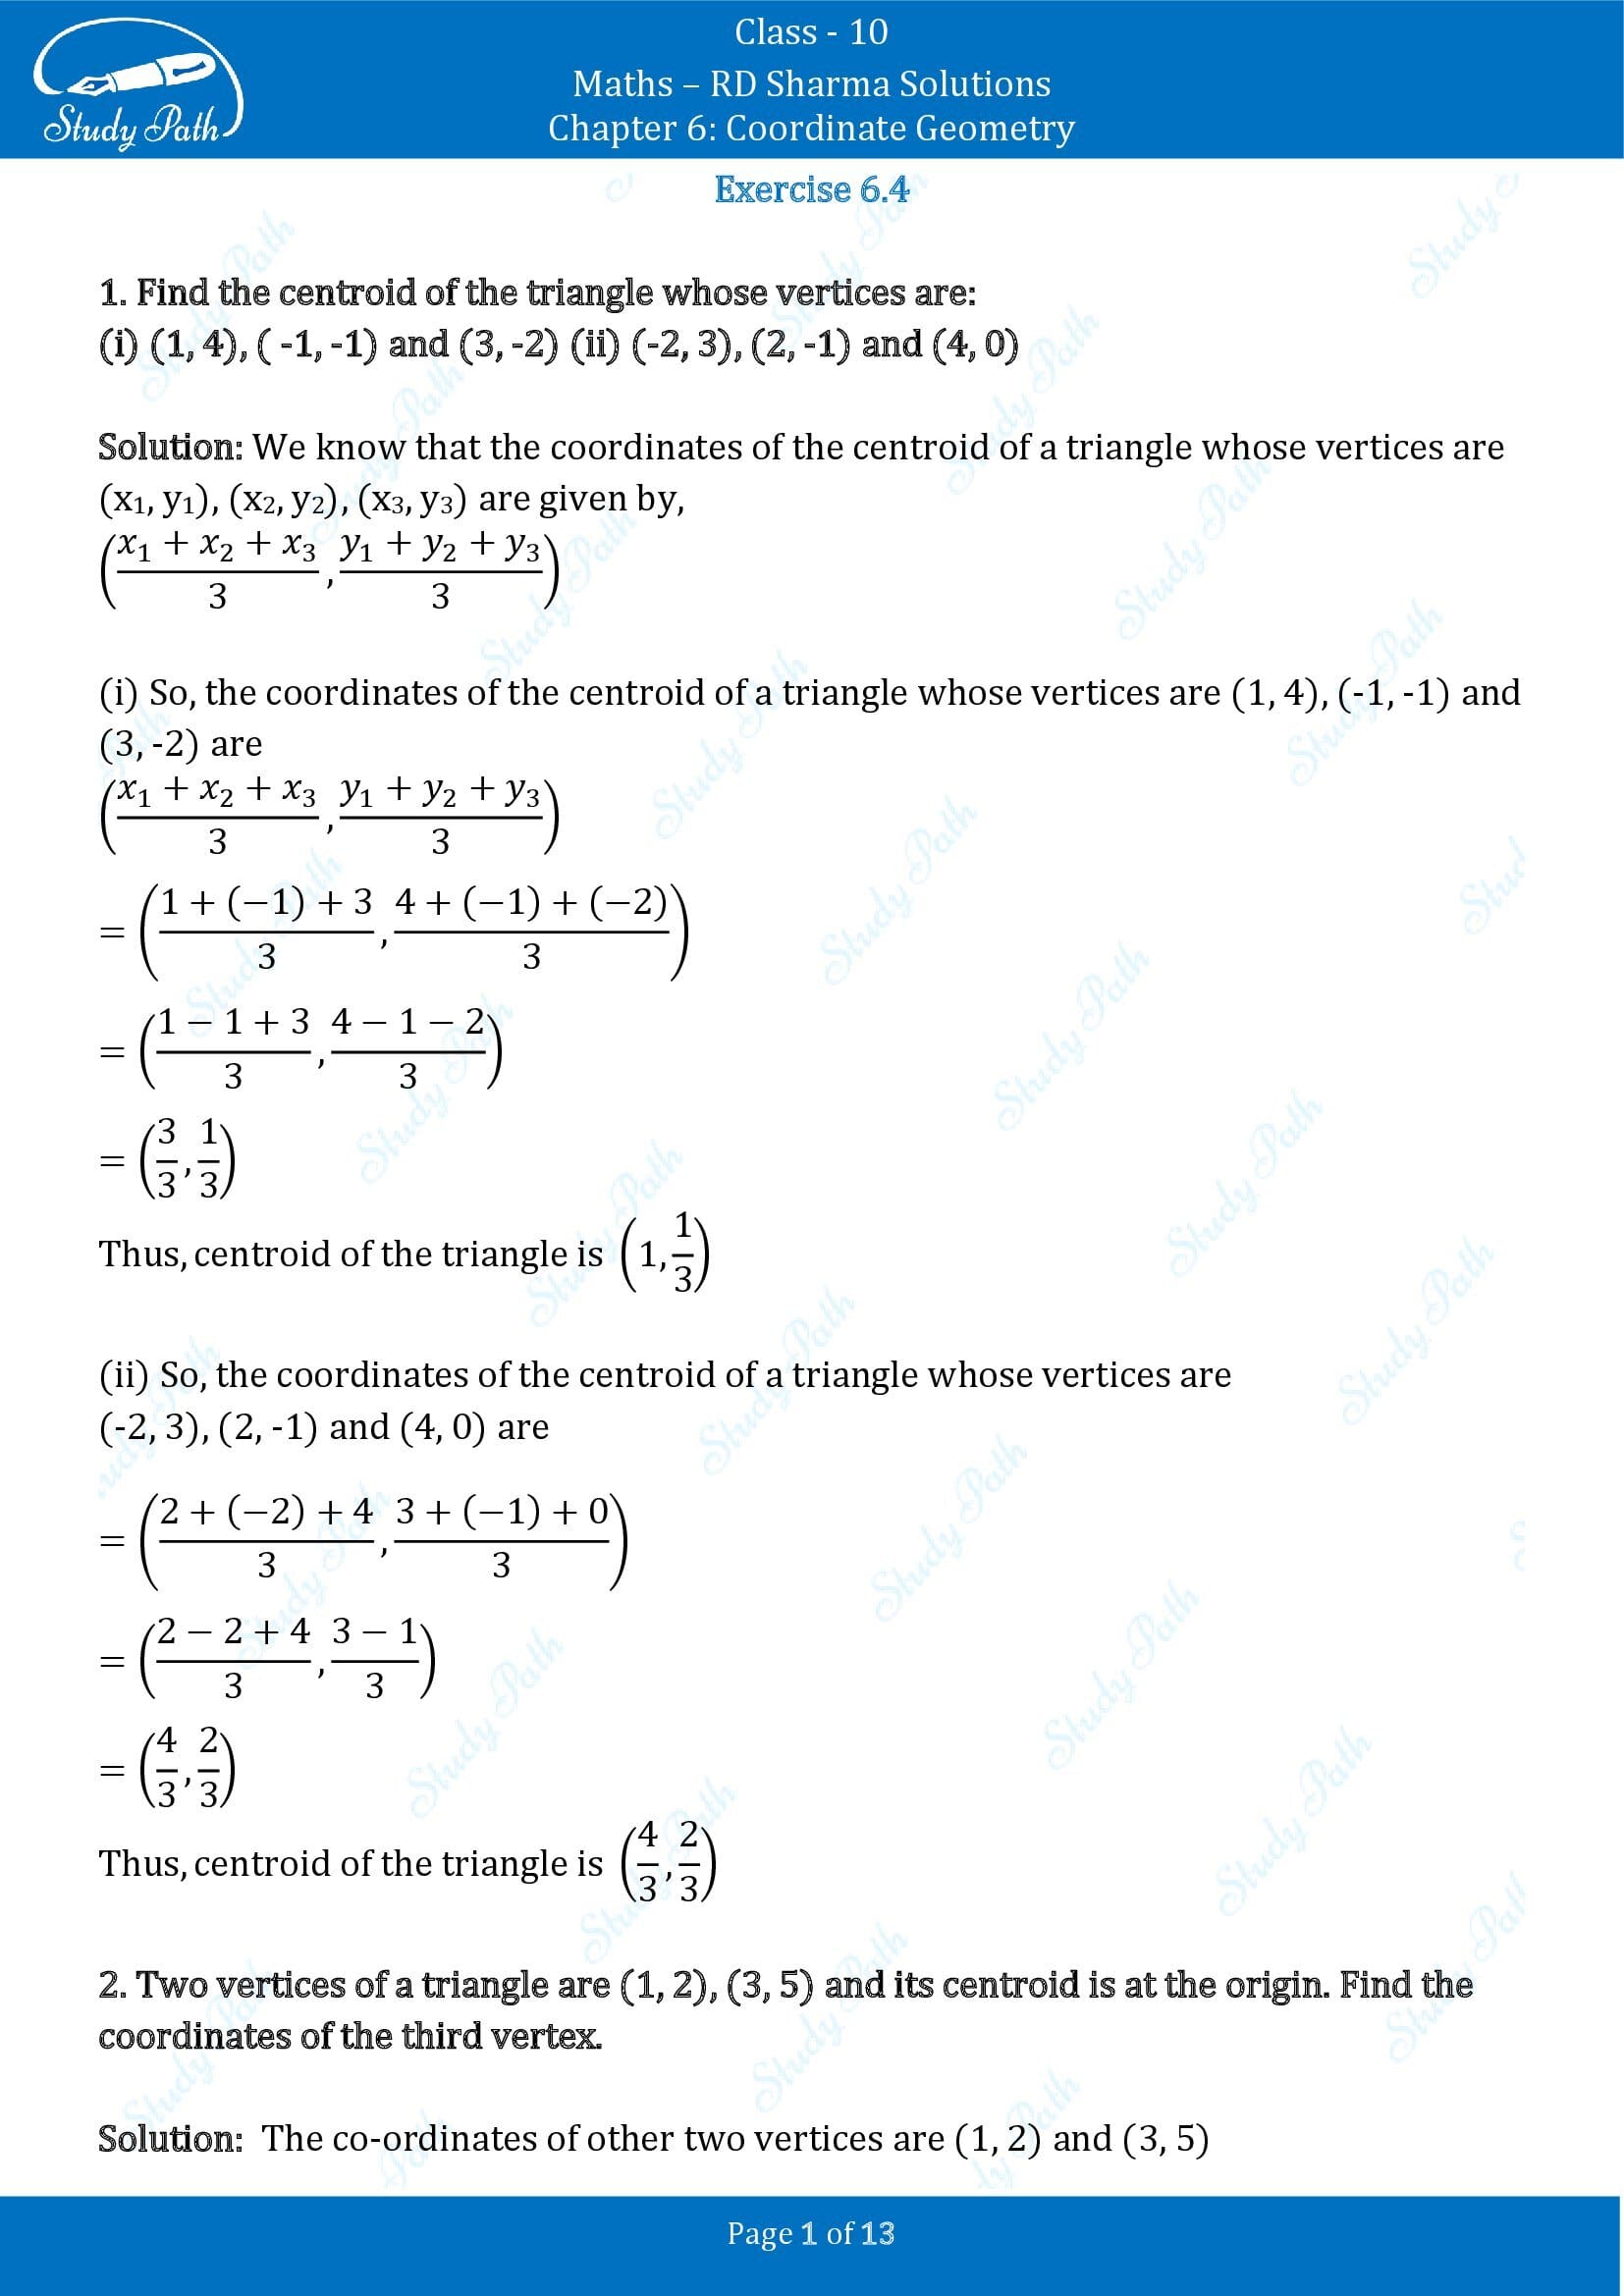 RD Sharma Solutions Class 10 Chapter 6 Coordinate Geometry Exercise 6.4 00001